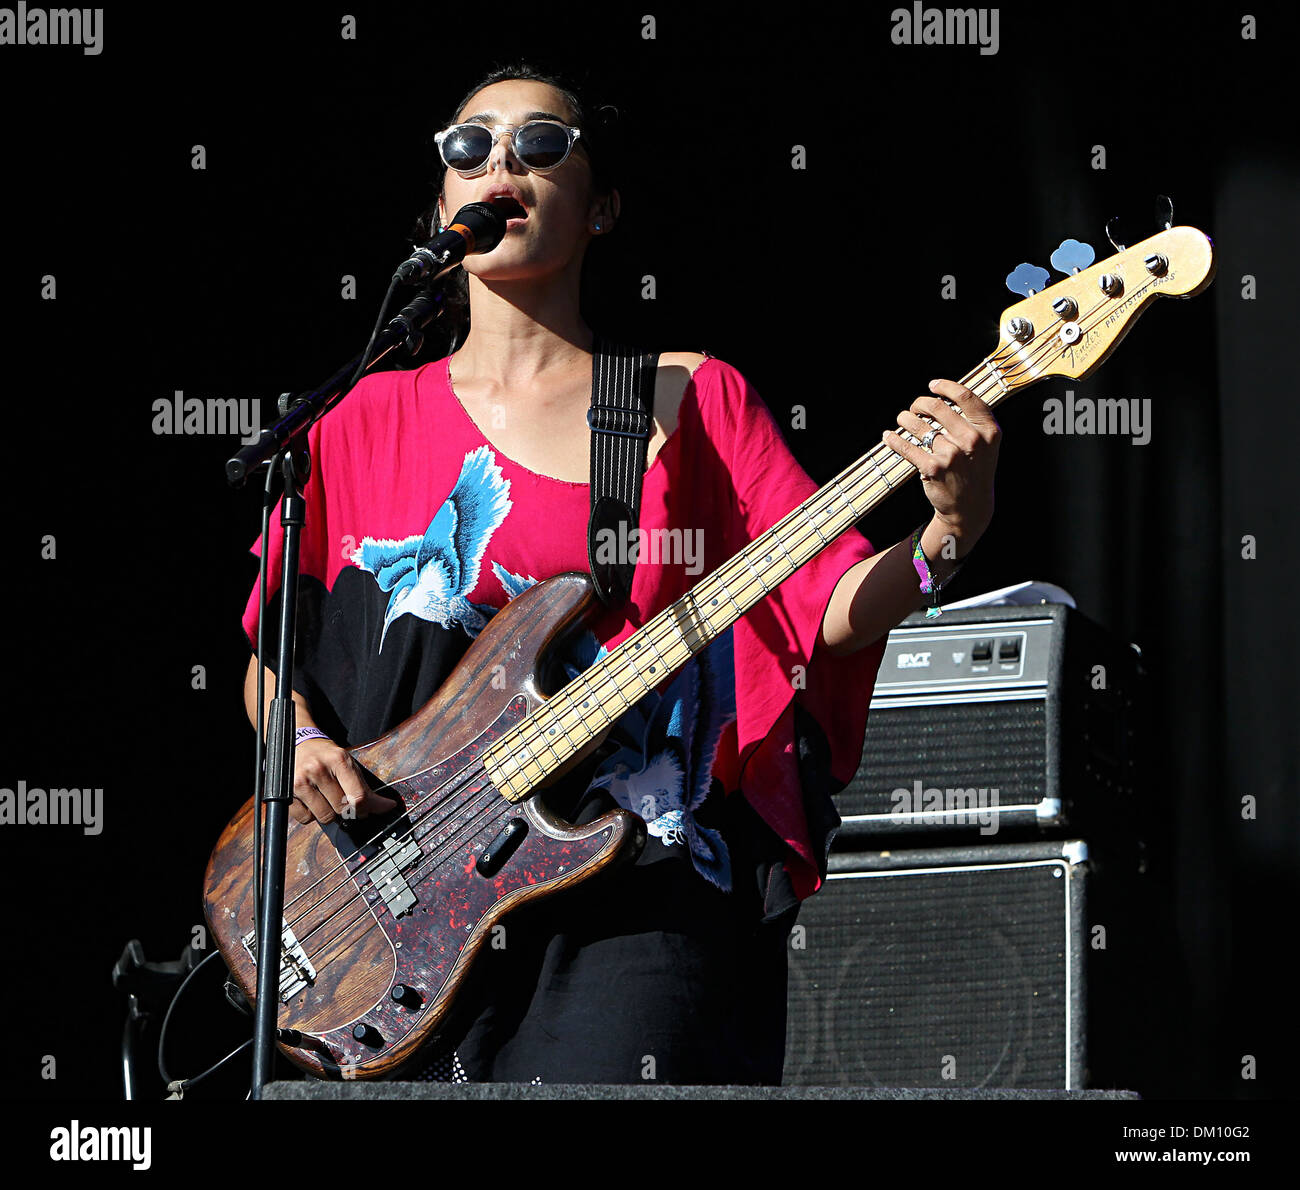 Jenny Lee Lindberg Of Warpaint Bestival 12 Held At Robin Hill Country Park Day Two Isle Of Wight 07 09 12 Stock Photo Alamy